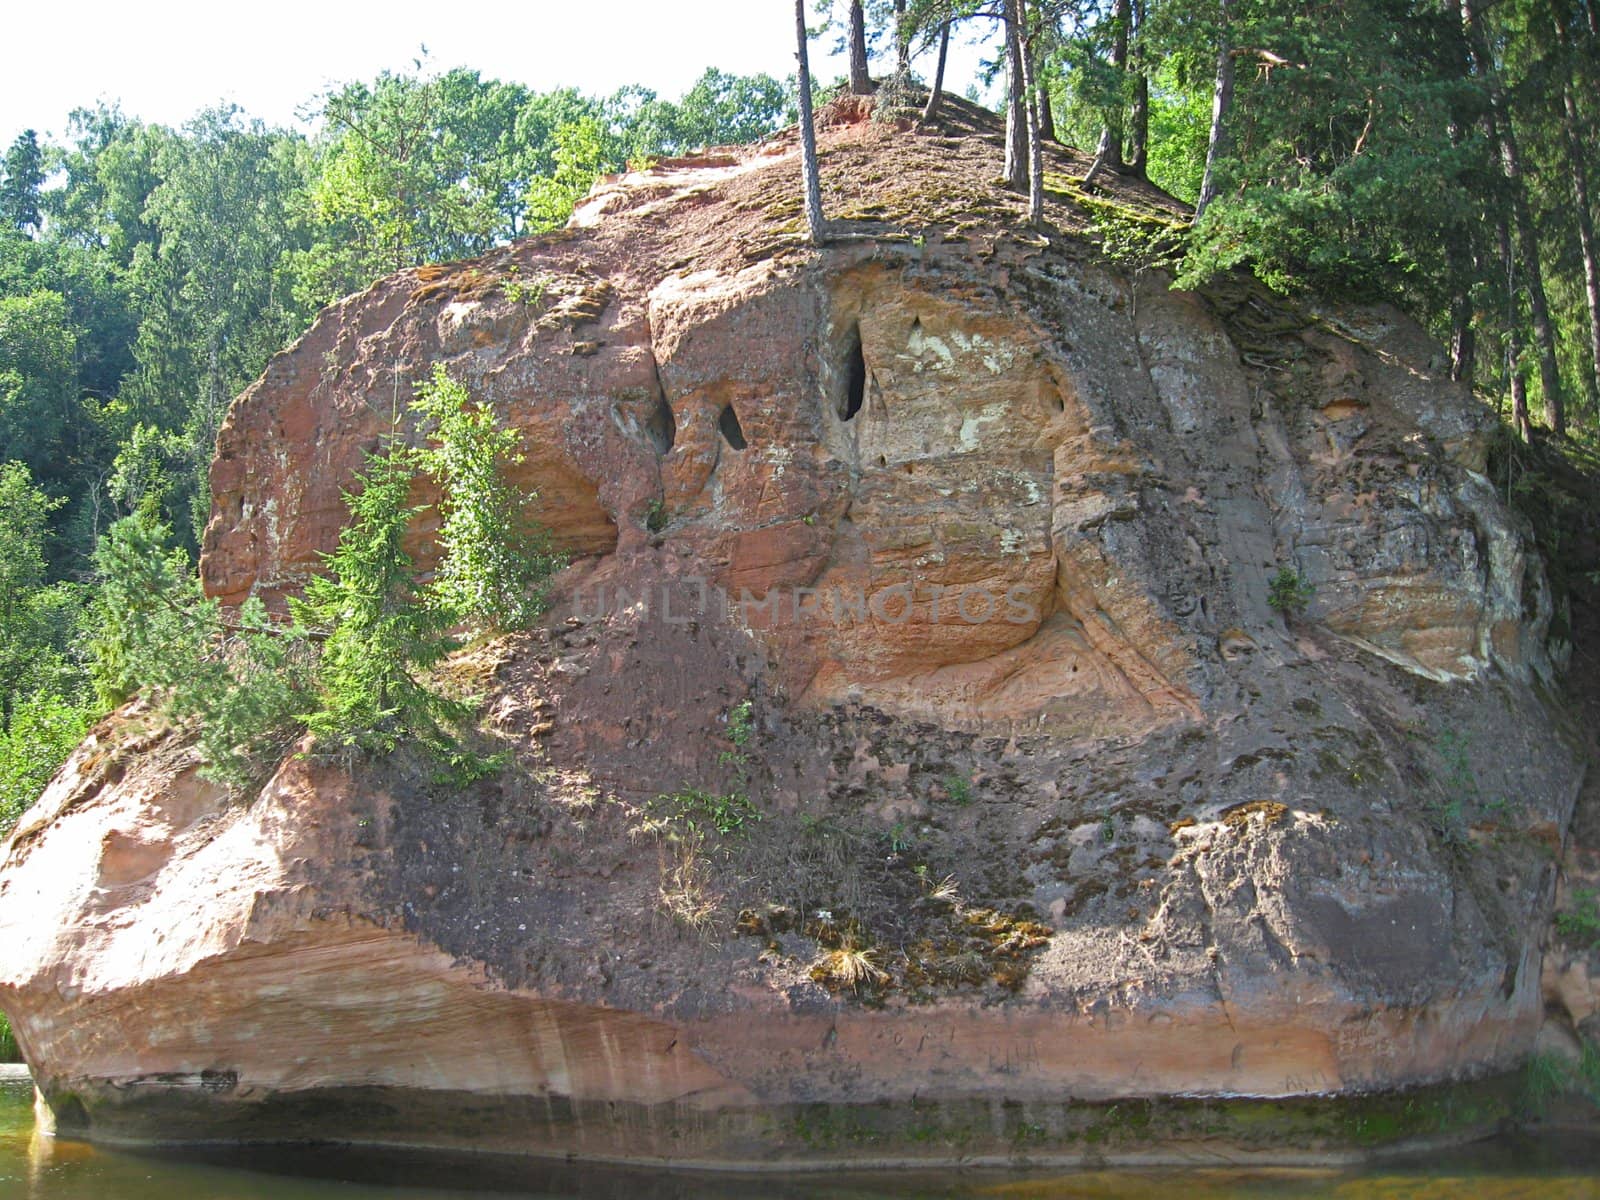 Zvārta Rock is one of the most spectacular outcrops of Devon rock formations in Latvia, set in the territory of the Gauja National Park. The Zvārta Rock has been formed by the River Amata gnawing at the sandstone on its banks.